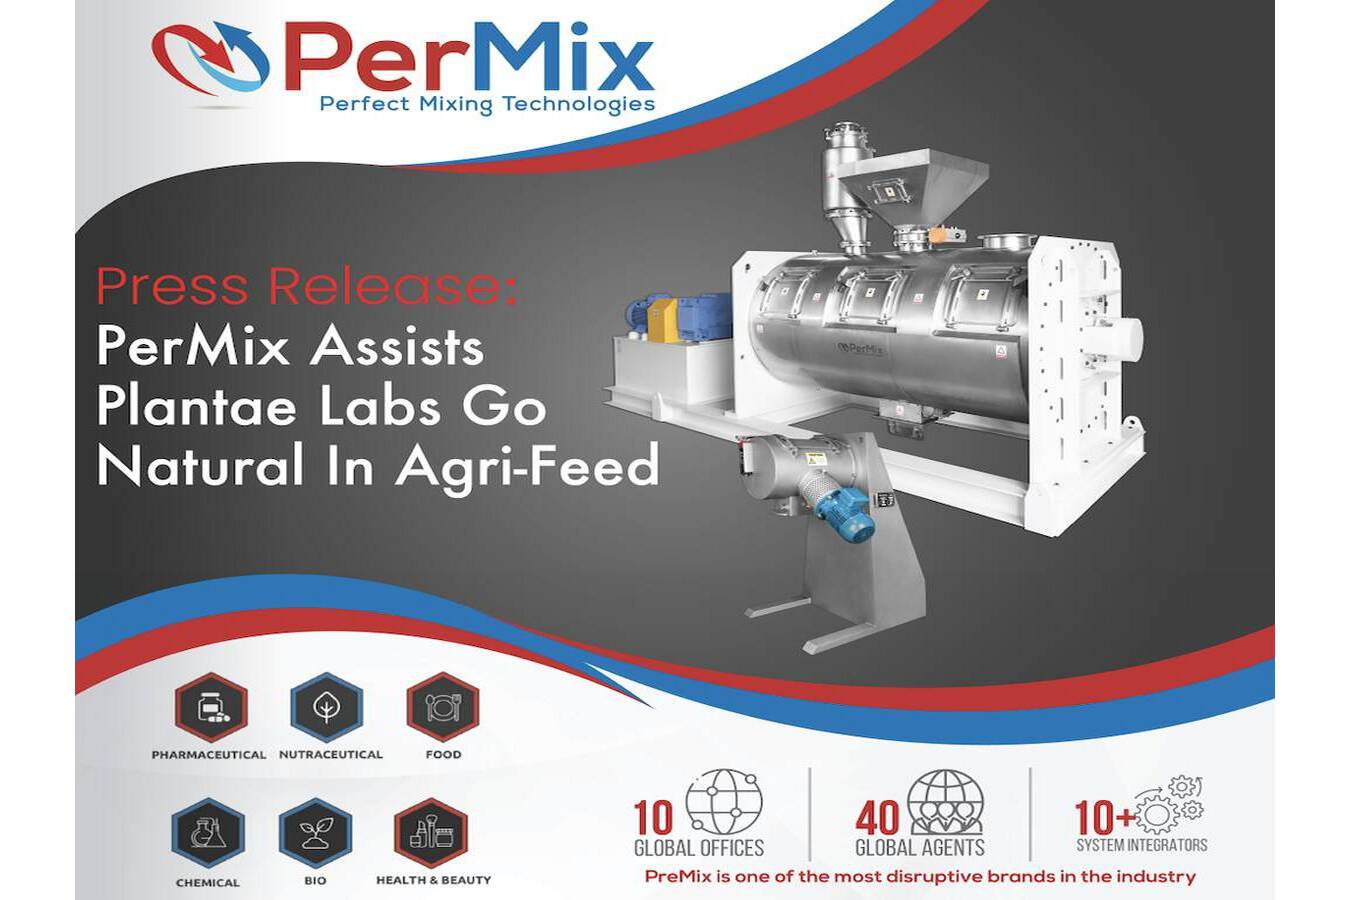 Plantae Labs choses PerMix Paddle Mixers for lab and production Plantae Labs takes agri-feed to the next level, with two PerMix Paddle Mixers; a PTP-30 paddle mixer for the lab and a PTP-6000 paddle mixer for production. 